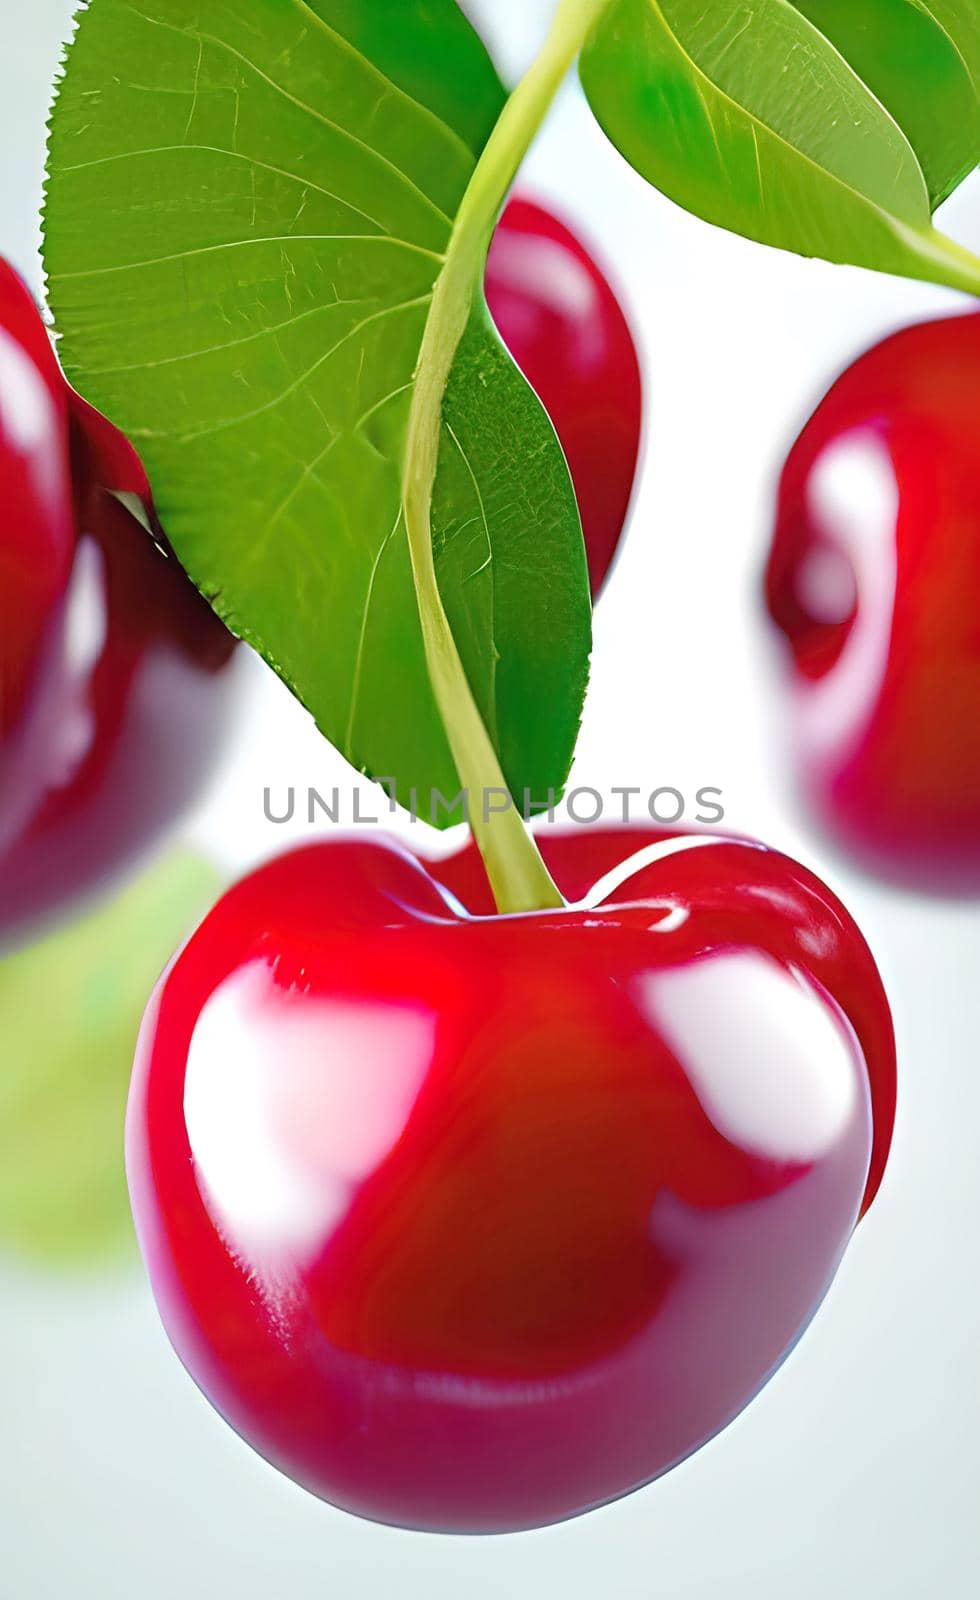 delicious and useful fruit of summer, cherry